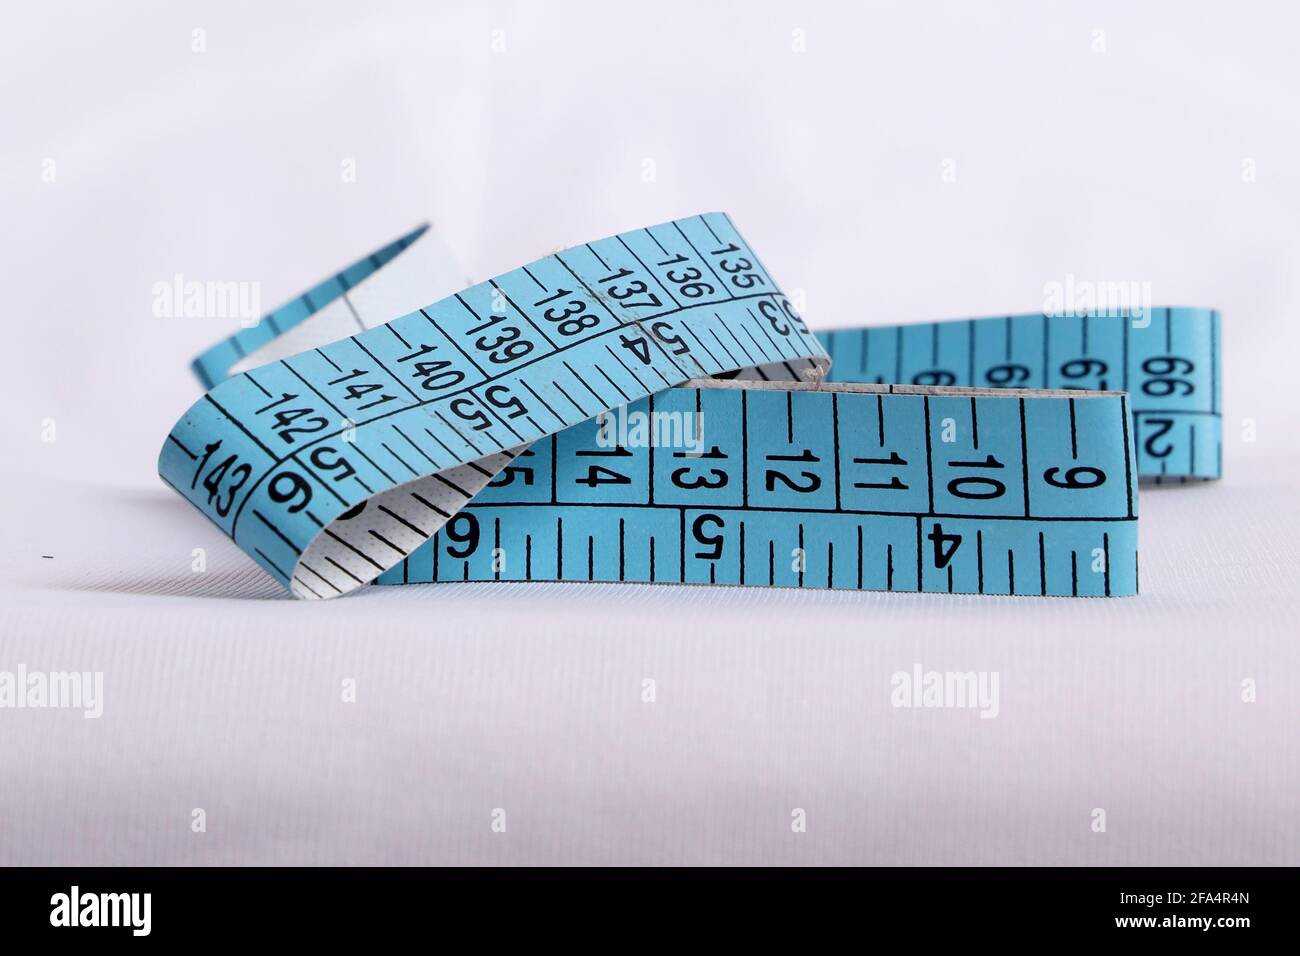 The measuring tape to measure the things Stock Photo